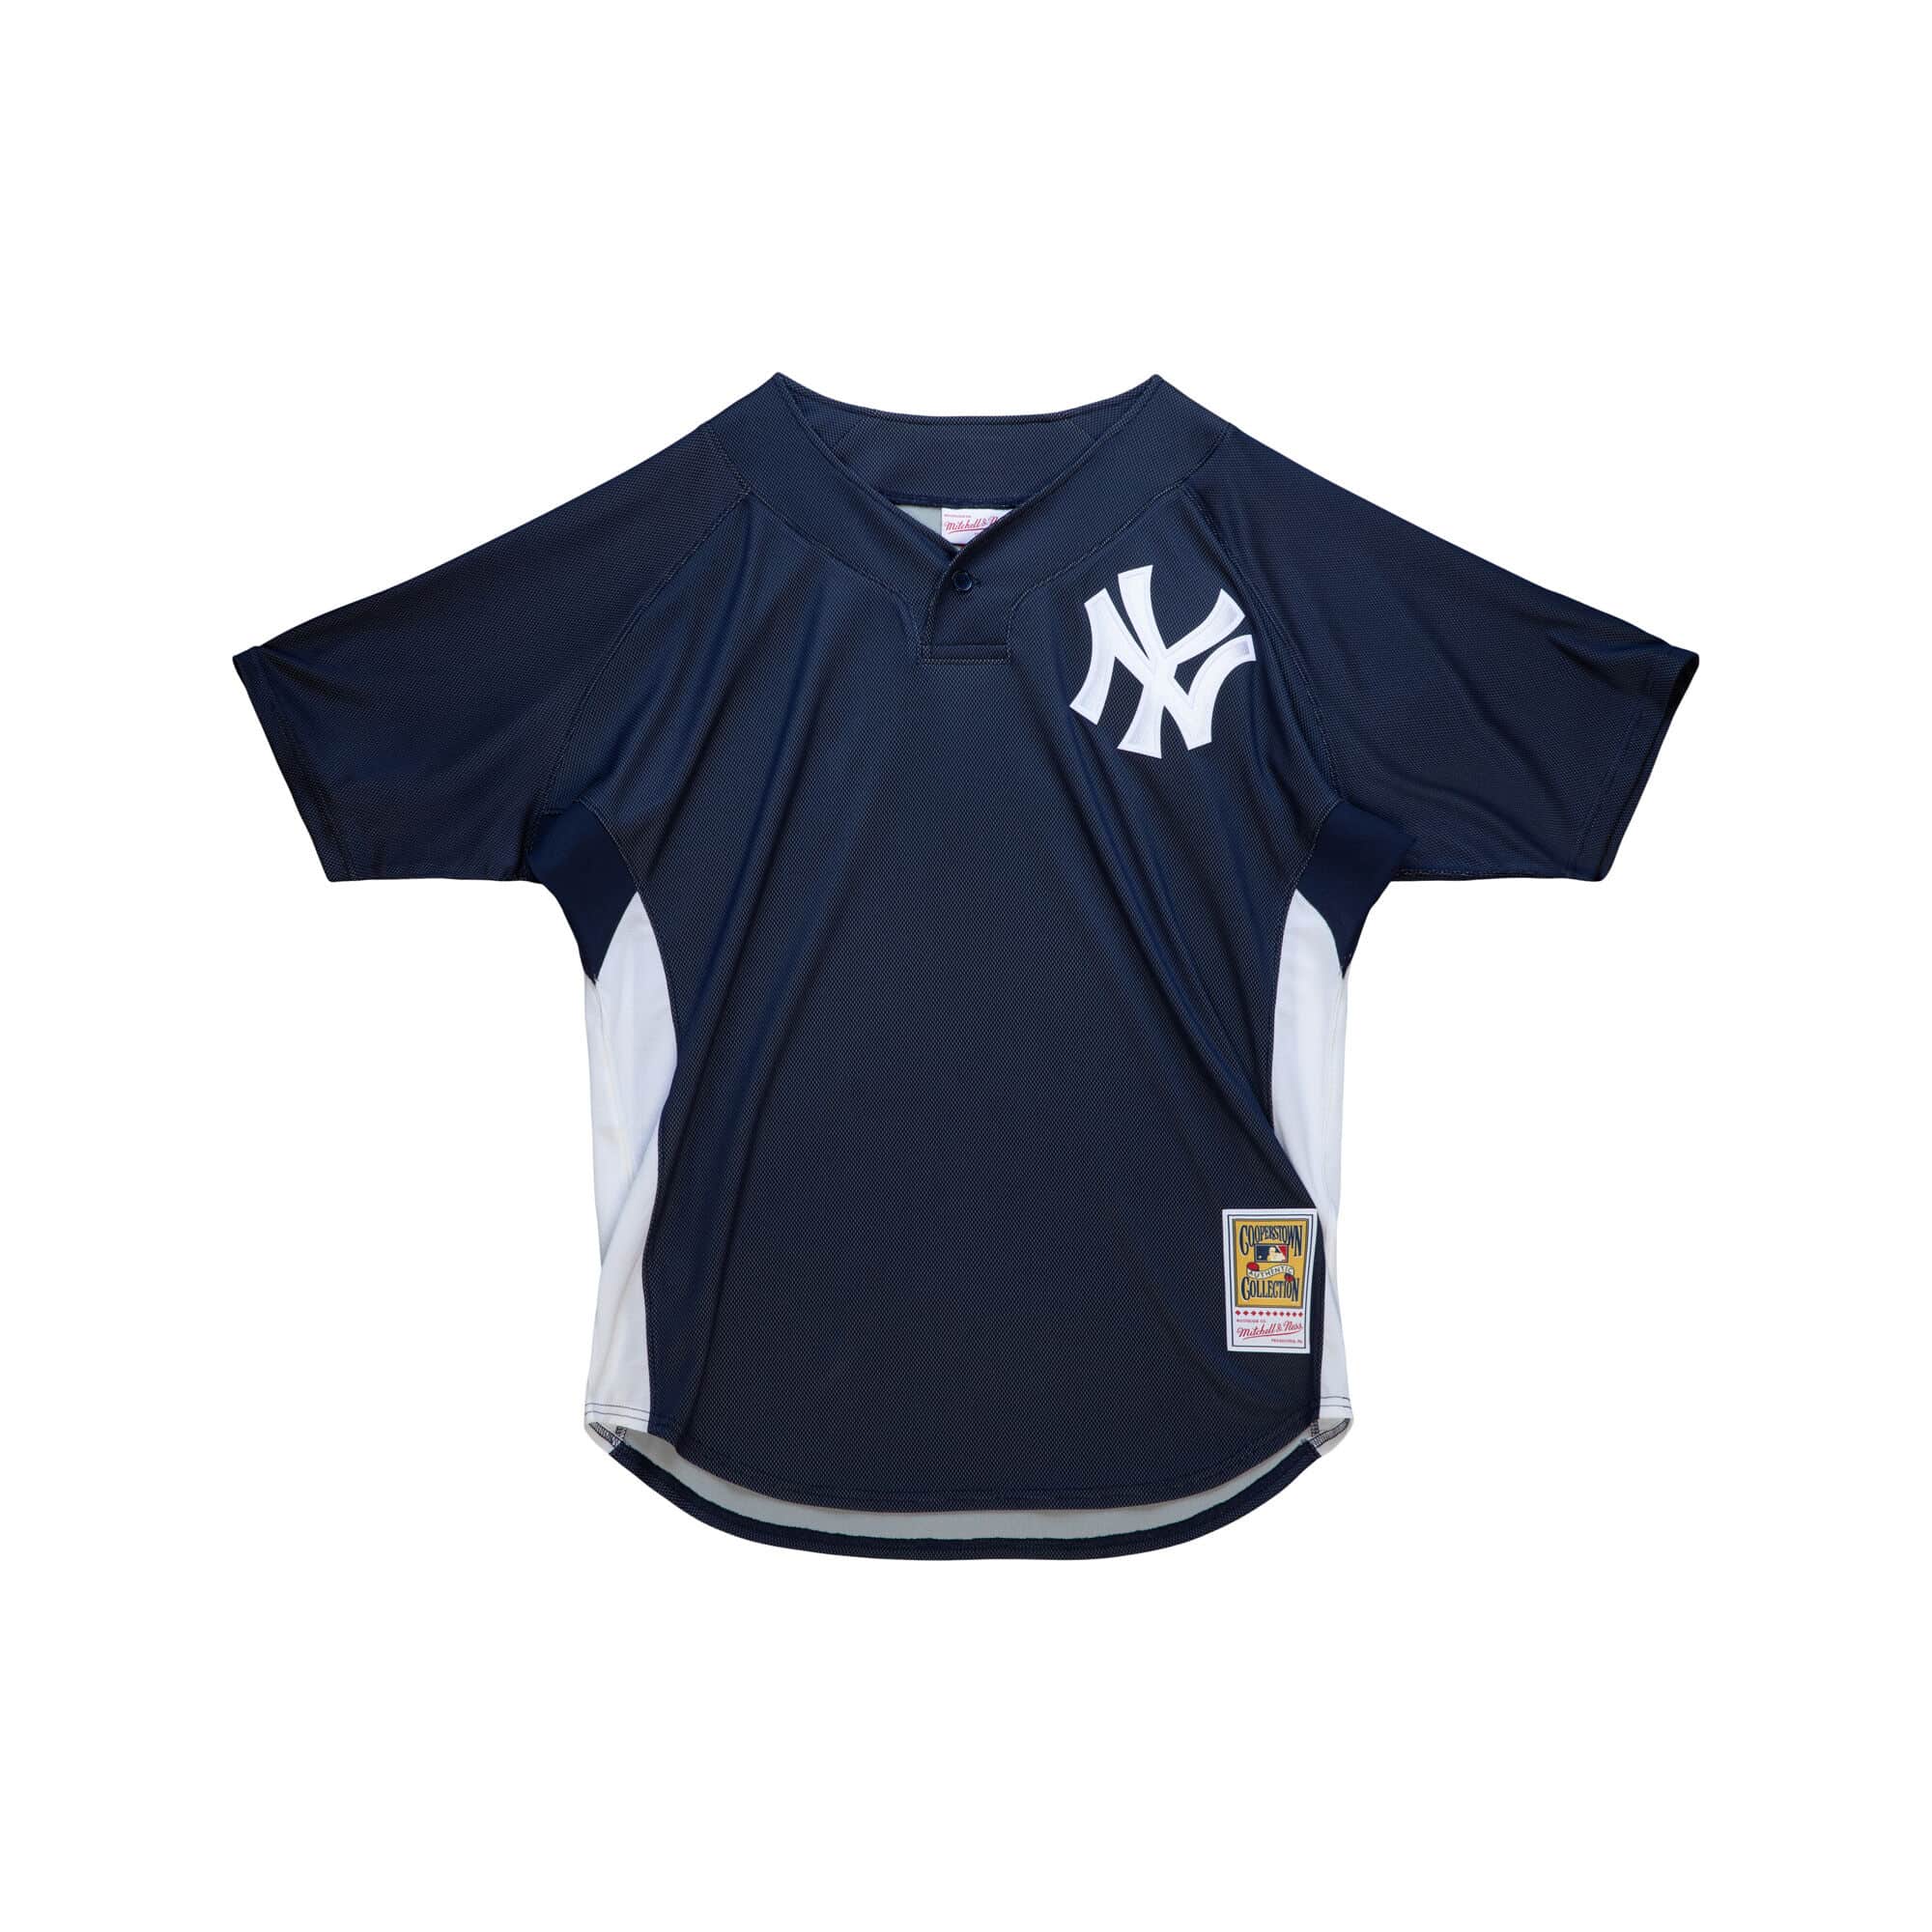 Mitchell & Ness - #mlb BP Jerseys are INCLUDED as part of our #FathersDay  sale! Head over to www.mitchellandness.com NOW before it's too late! - Take  30% off sitewide and enjoy a #